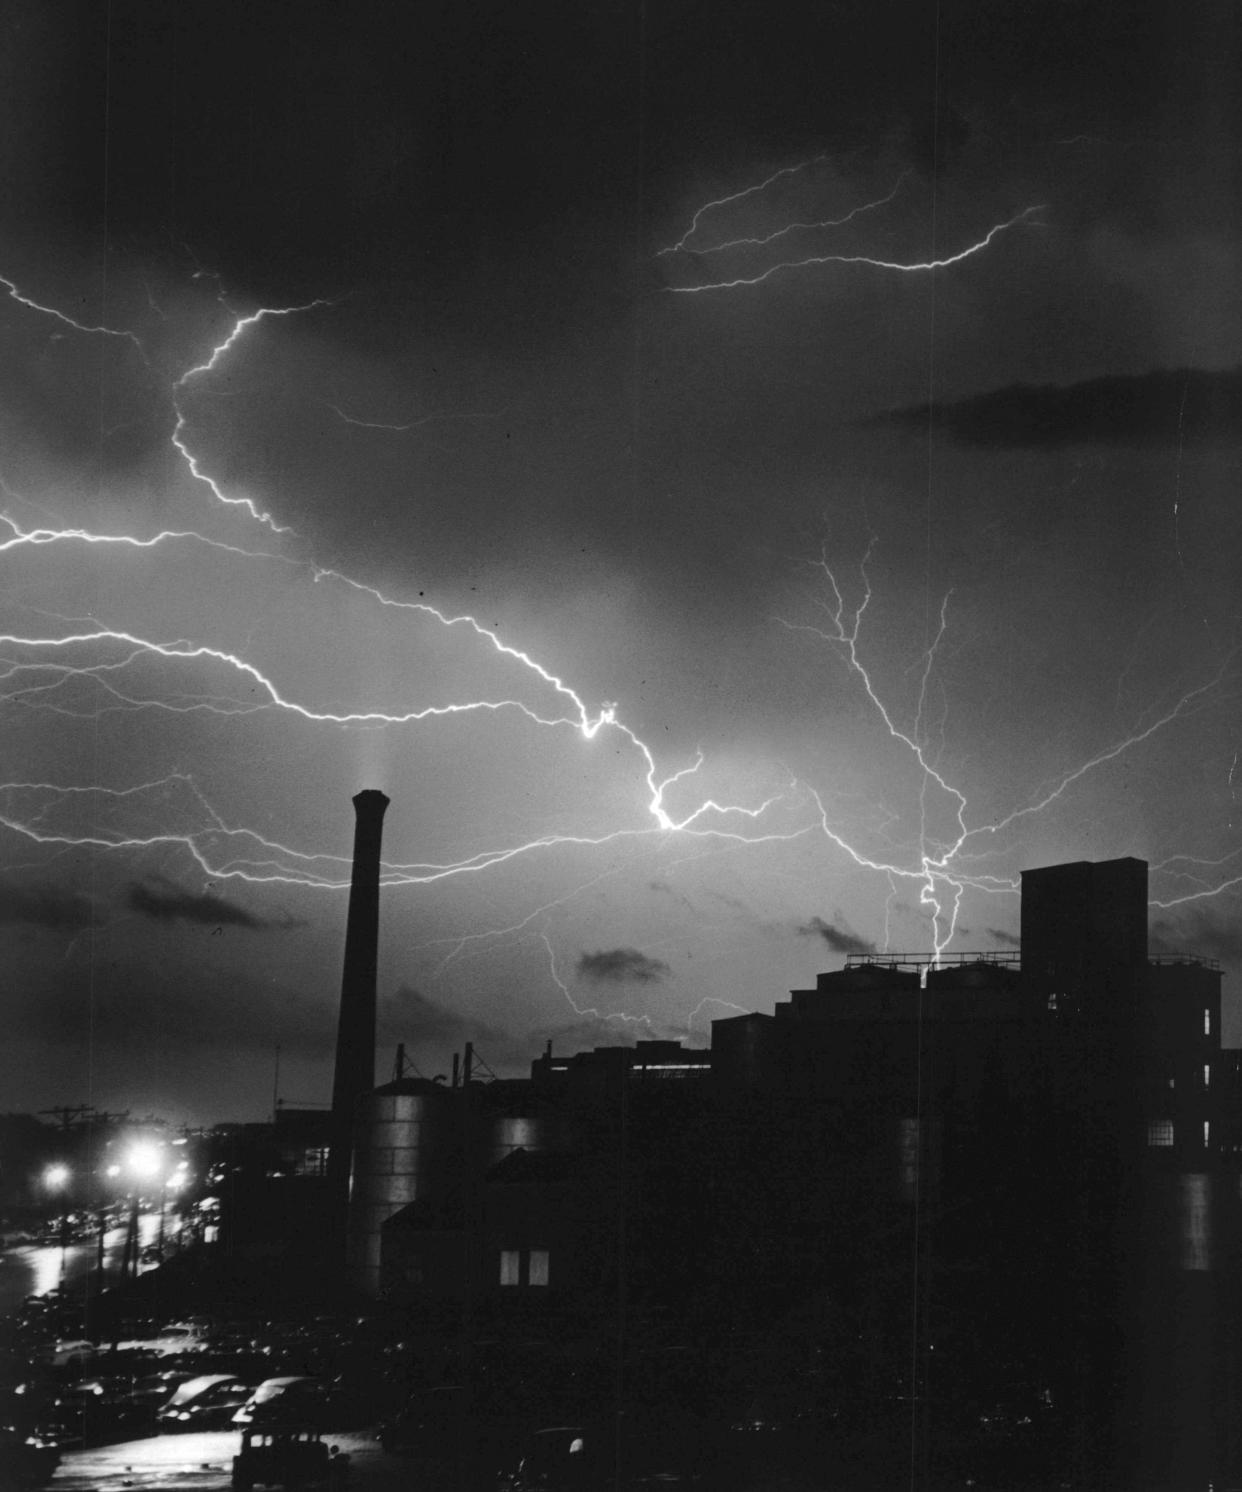 A 1952 Press Photo captured lightning flashing across the sky accompanied by loud thunderclaps and a half-inch of rain. There were power failures because of downed wires and transformers hit by lightning. The picture was taken with the camera pointed south from the Milwaukee Road bridge spanning W. Capitol Drive near N. 32nd Street. A.O. Smith Corporation is outlined against the lightning flashes.